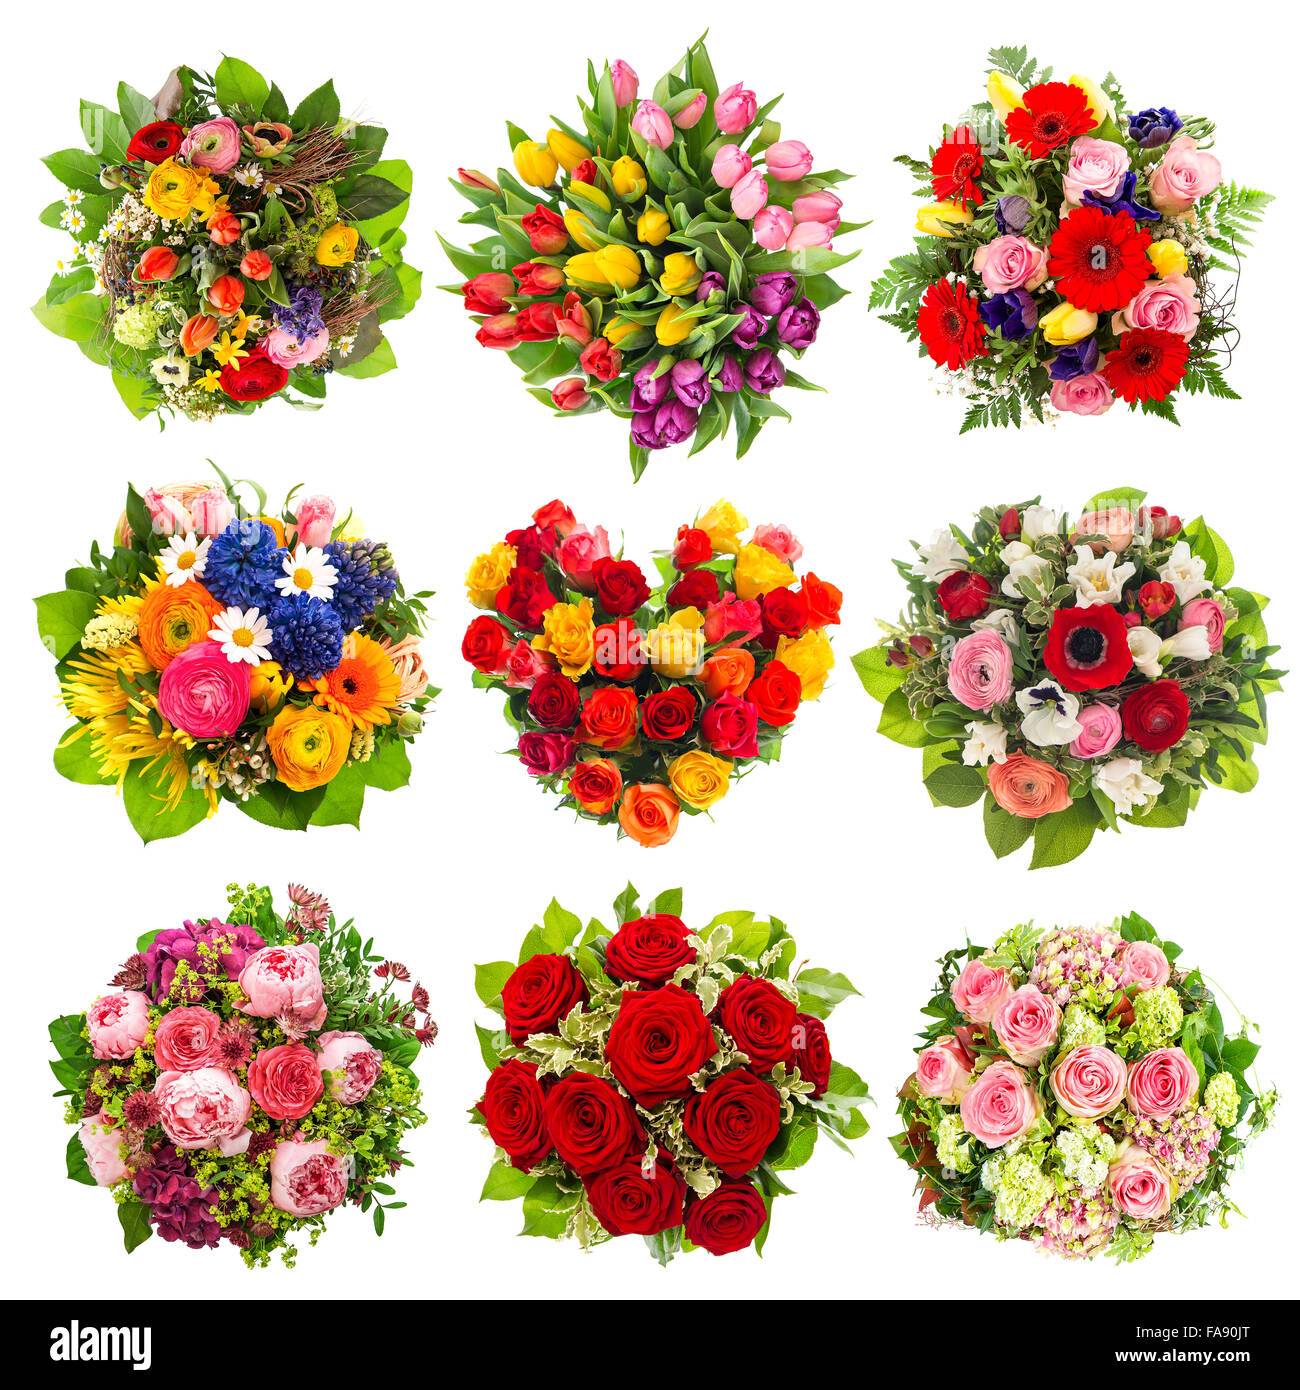 Flowers bouquet for Birthday, Wedding, Mother's Day, Easter, Anniversary, Holidays. Roses, Tulips, Peony Stock Photo